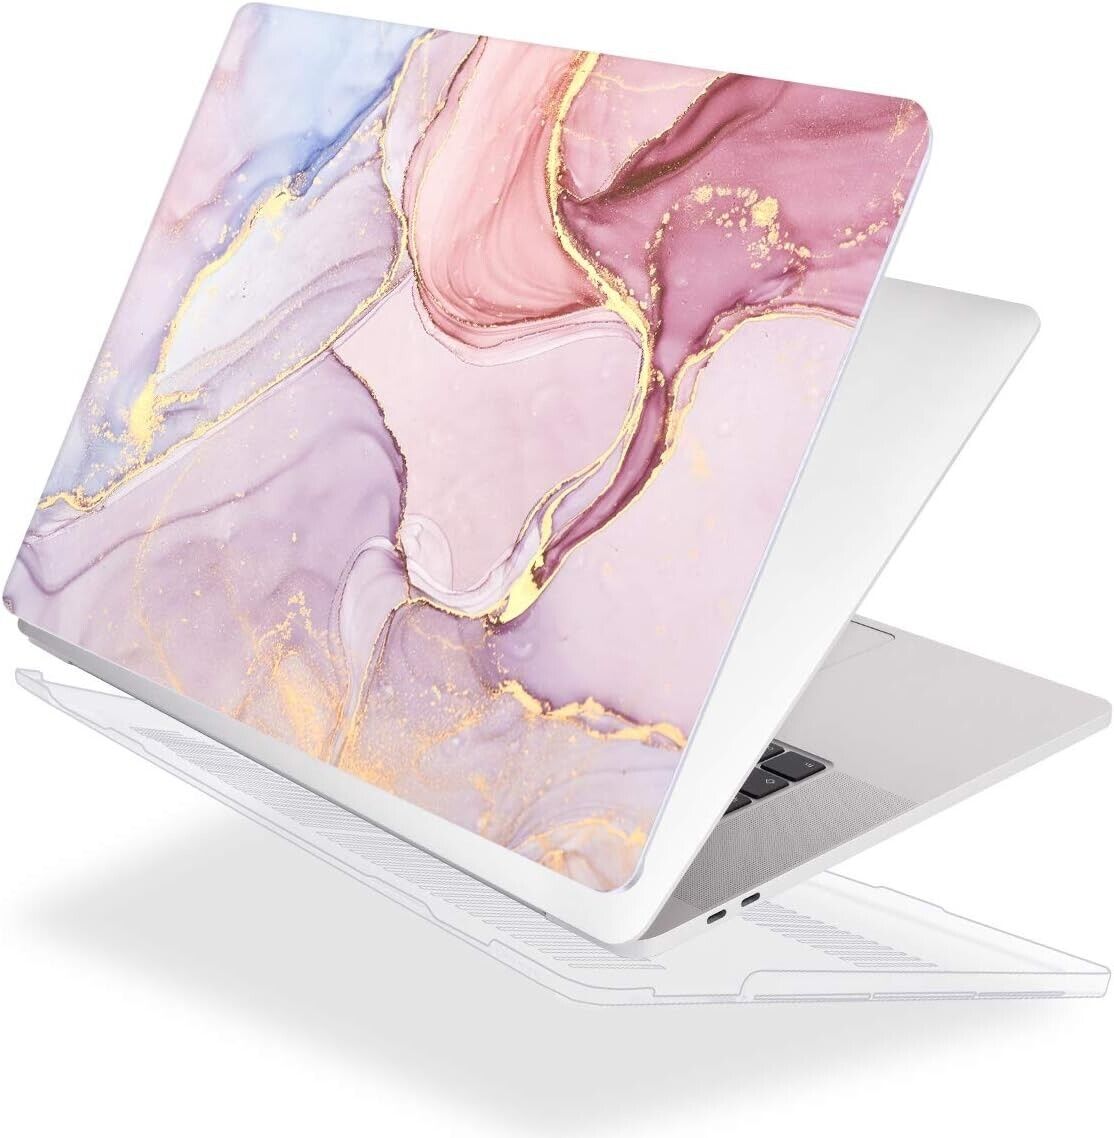 Mektron Pink Gold Marble Laptop Case For Macbook Pro 16 Hard Shell Cover Protect